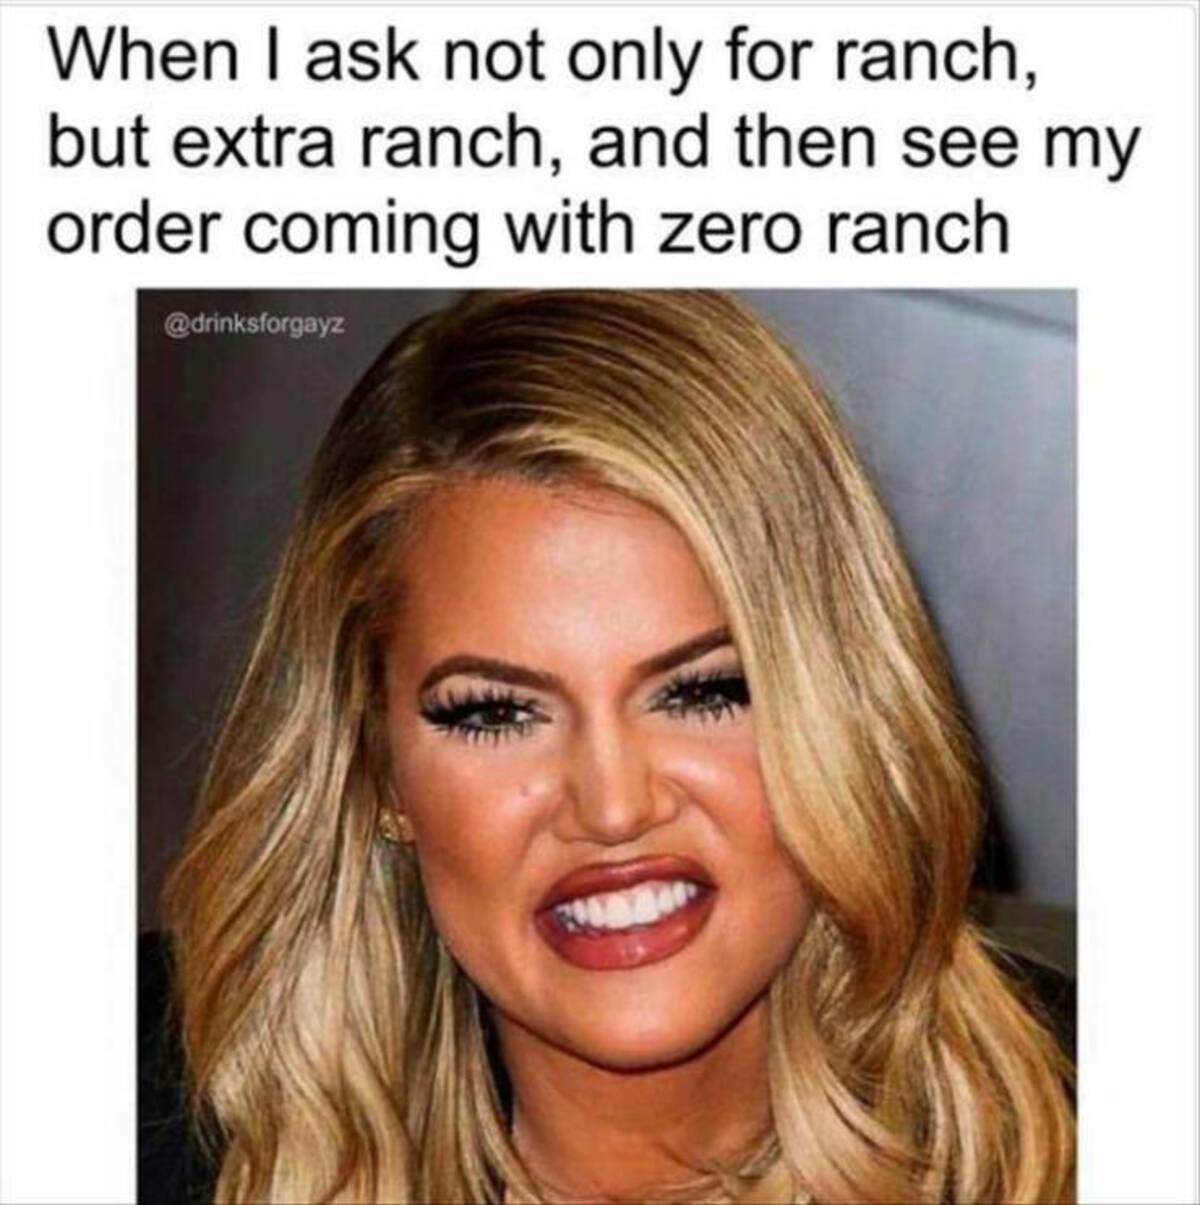 khloe kardashian wrinkles - When I ask not only for ranch, but extra ranch, and then see my order coming with zero ranch